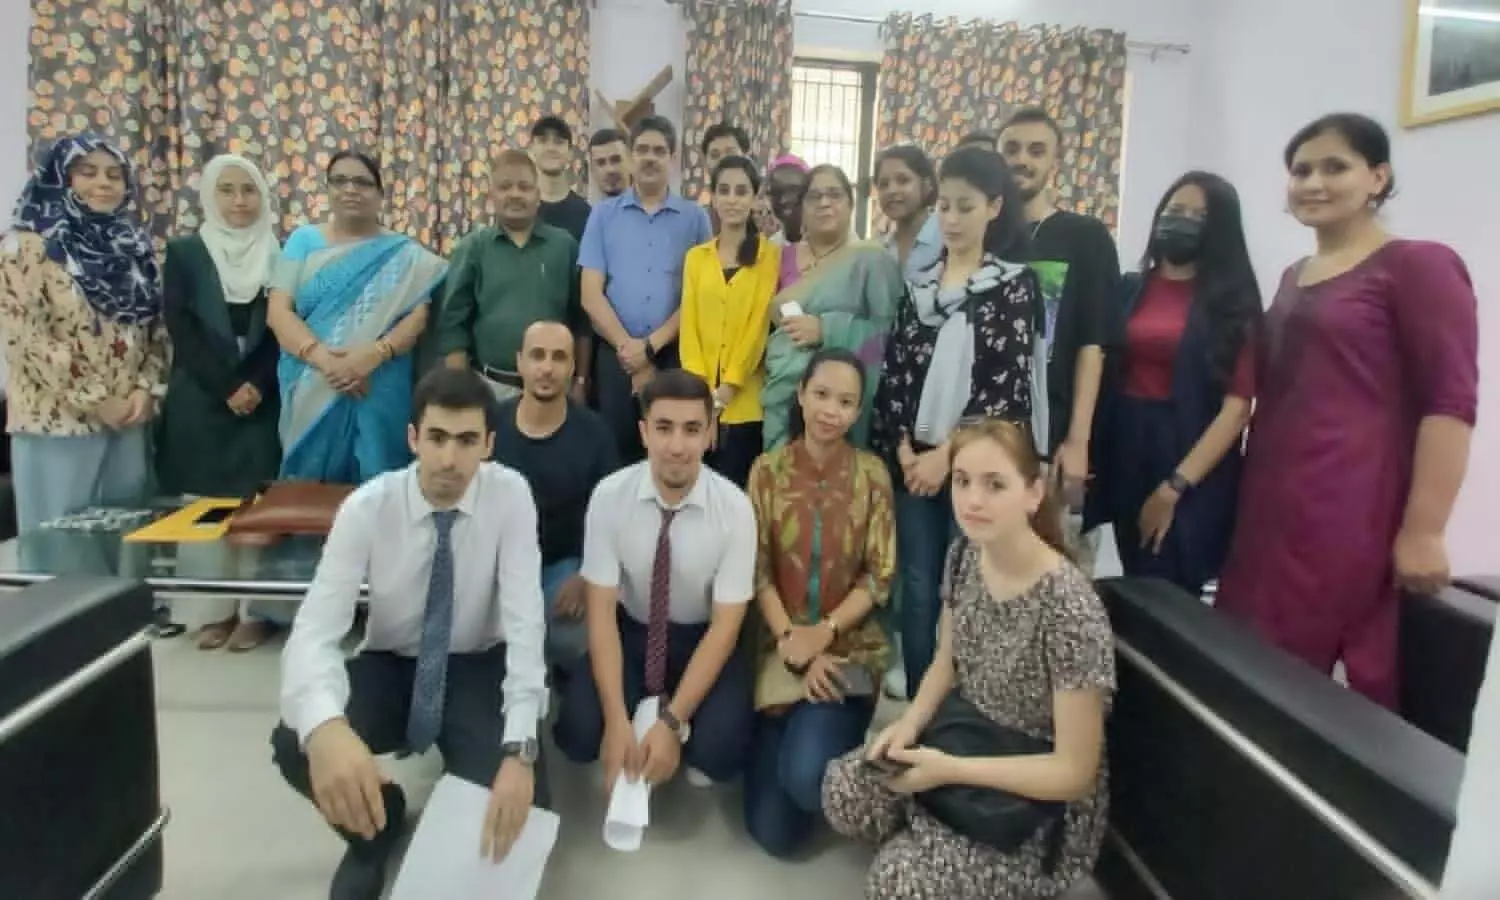 Seminar on Cross Cultural Communication for a Better World at Lucknow University, students from many countries participated